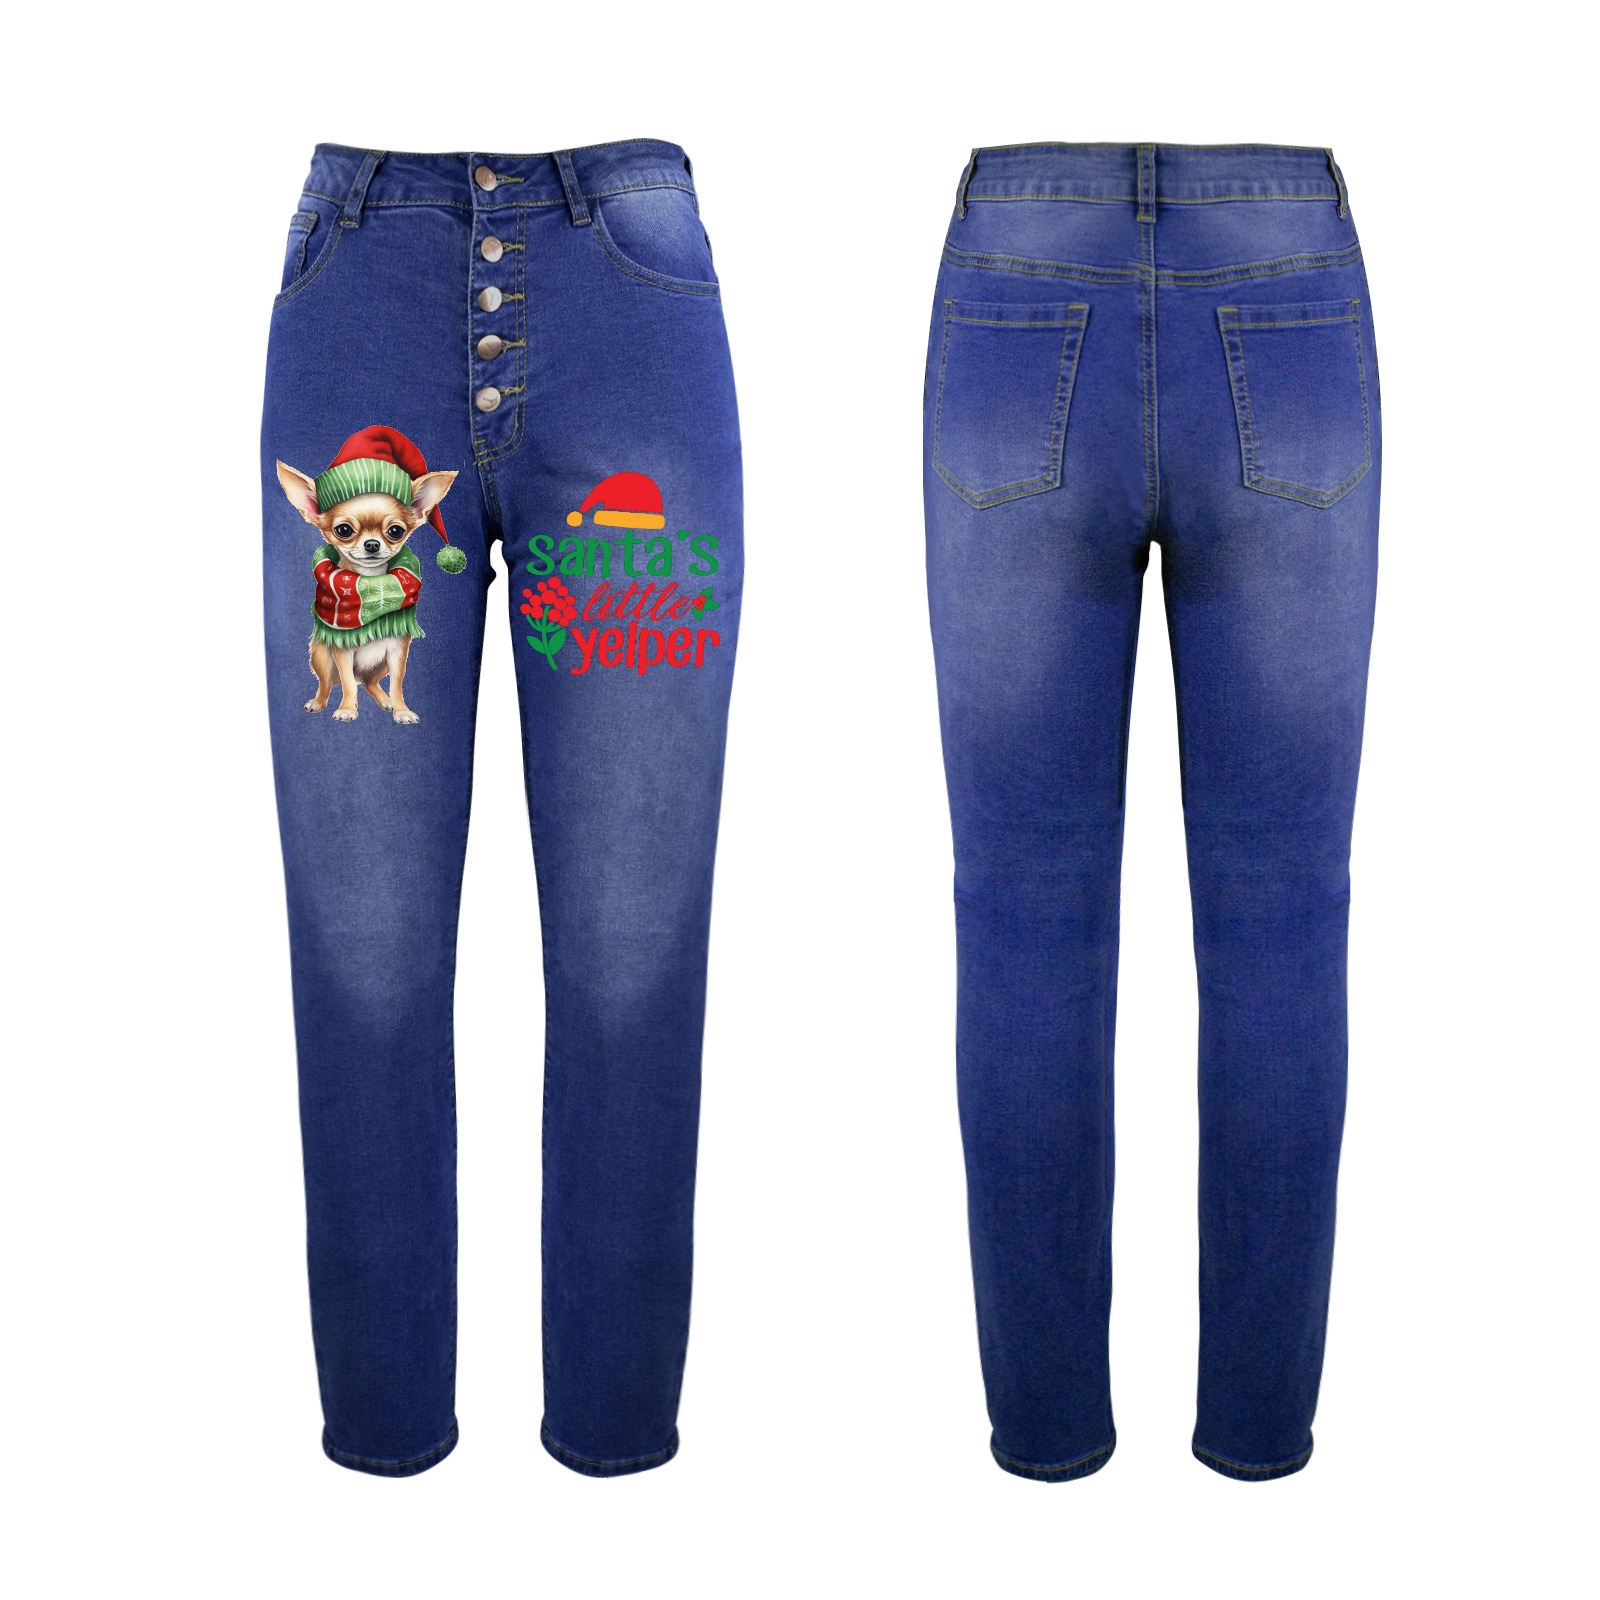 Santa's little Helper Chihuahua Women's Jeans (Front Printing)